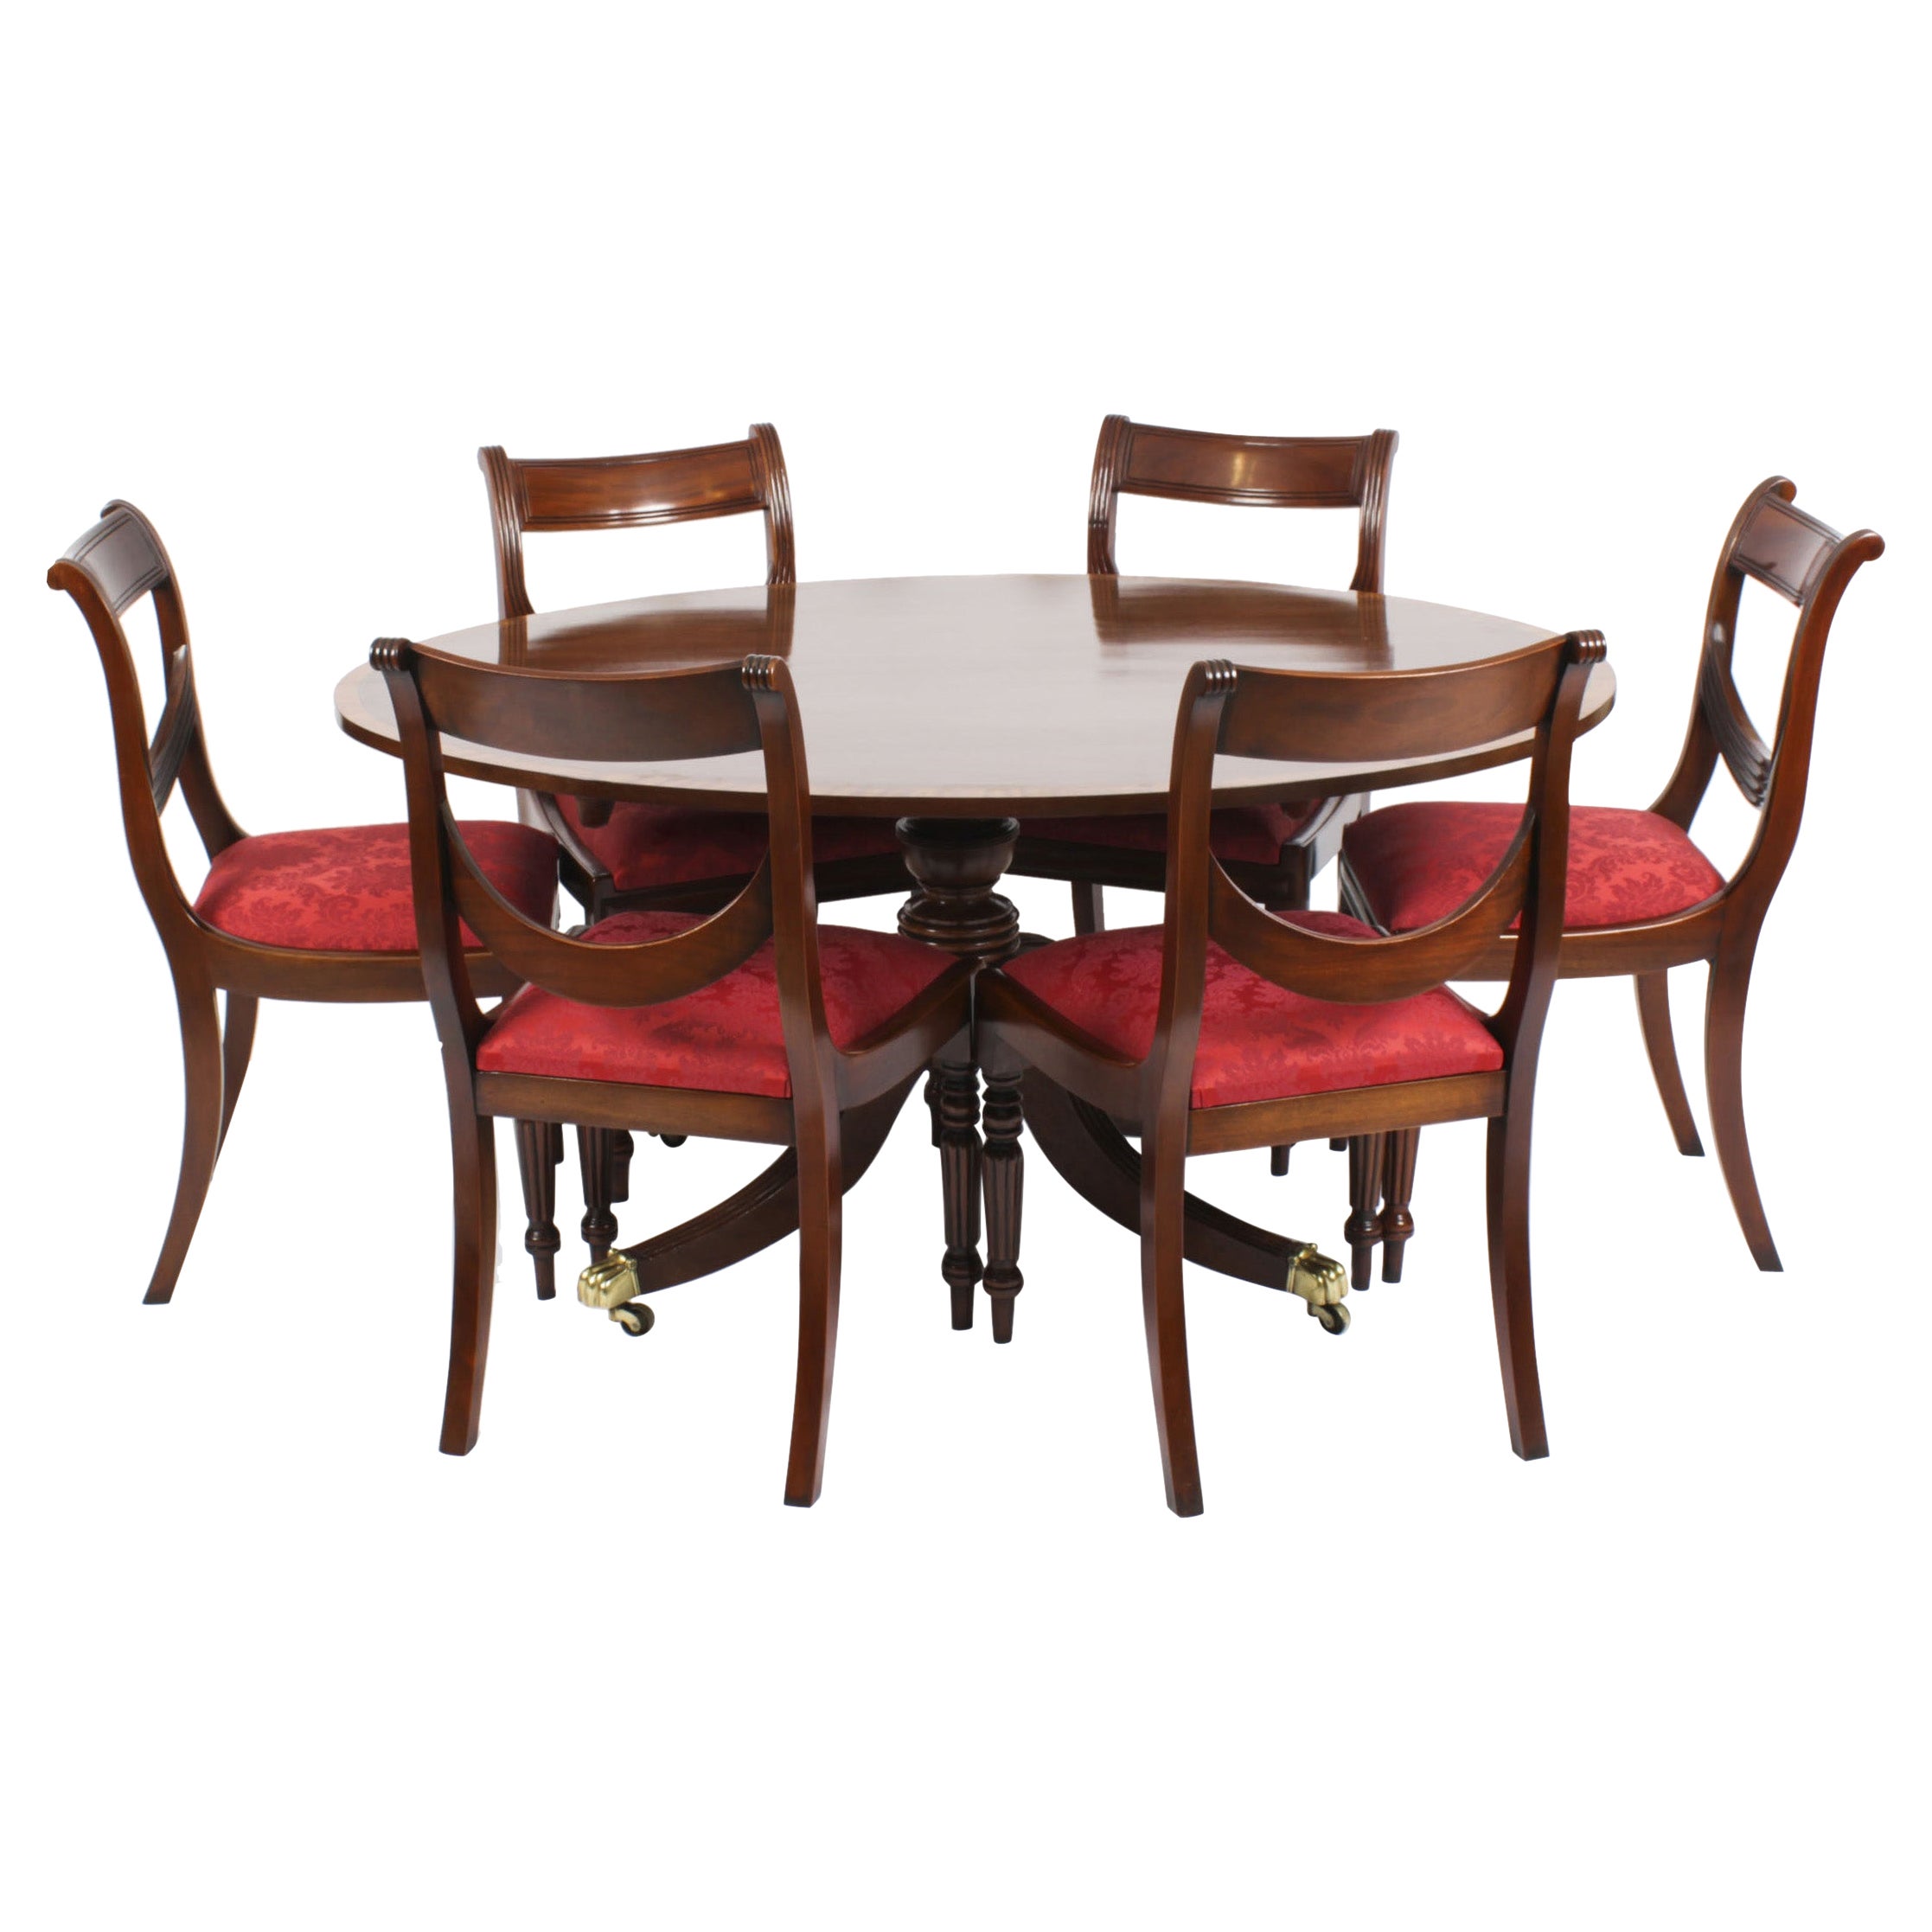 Antique Regency Flame Mahogany Dining Table 19th Century & 6 Chairs